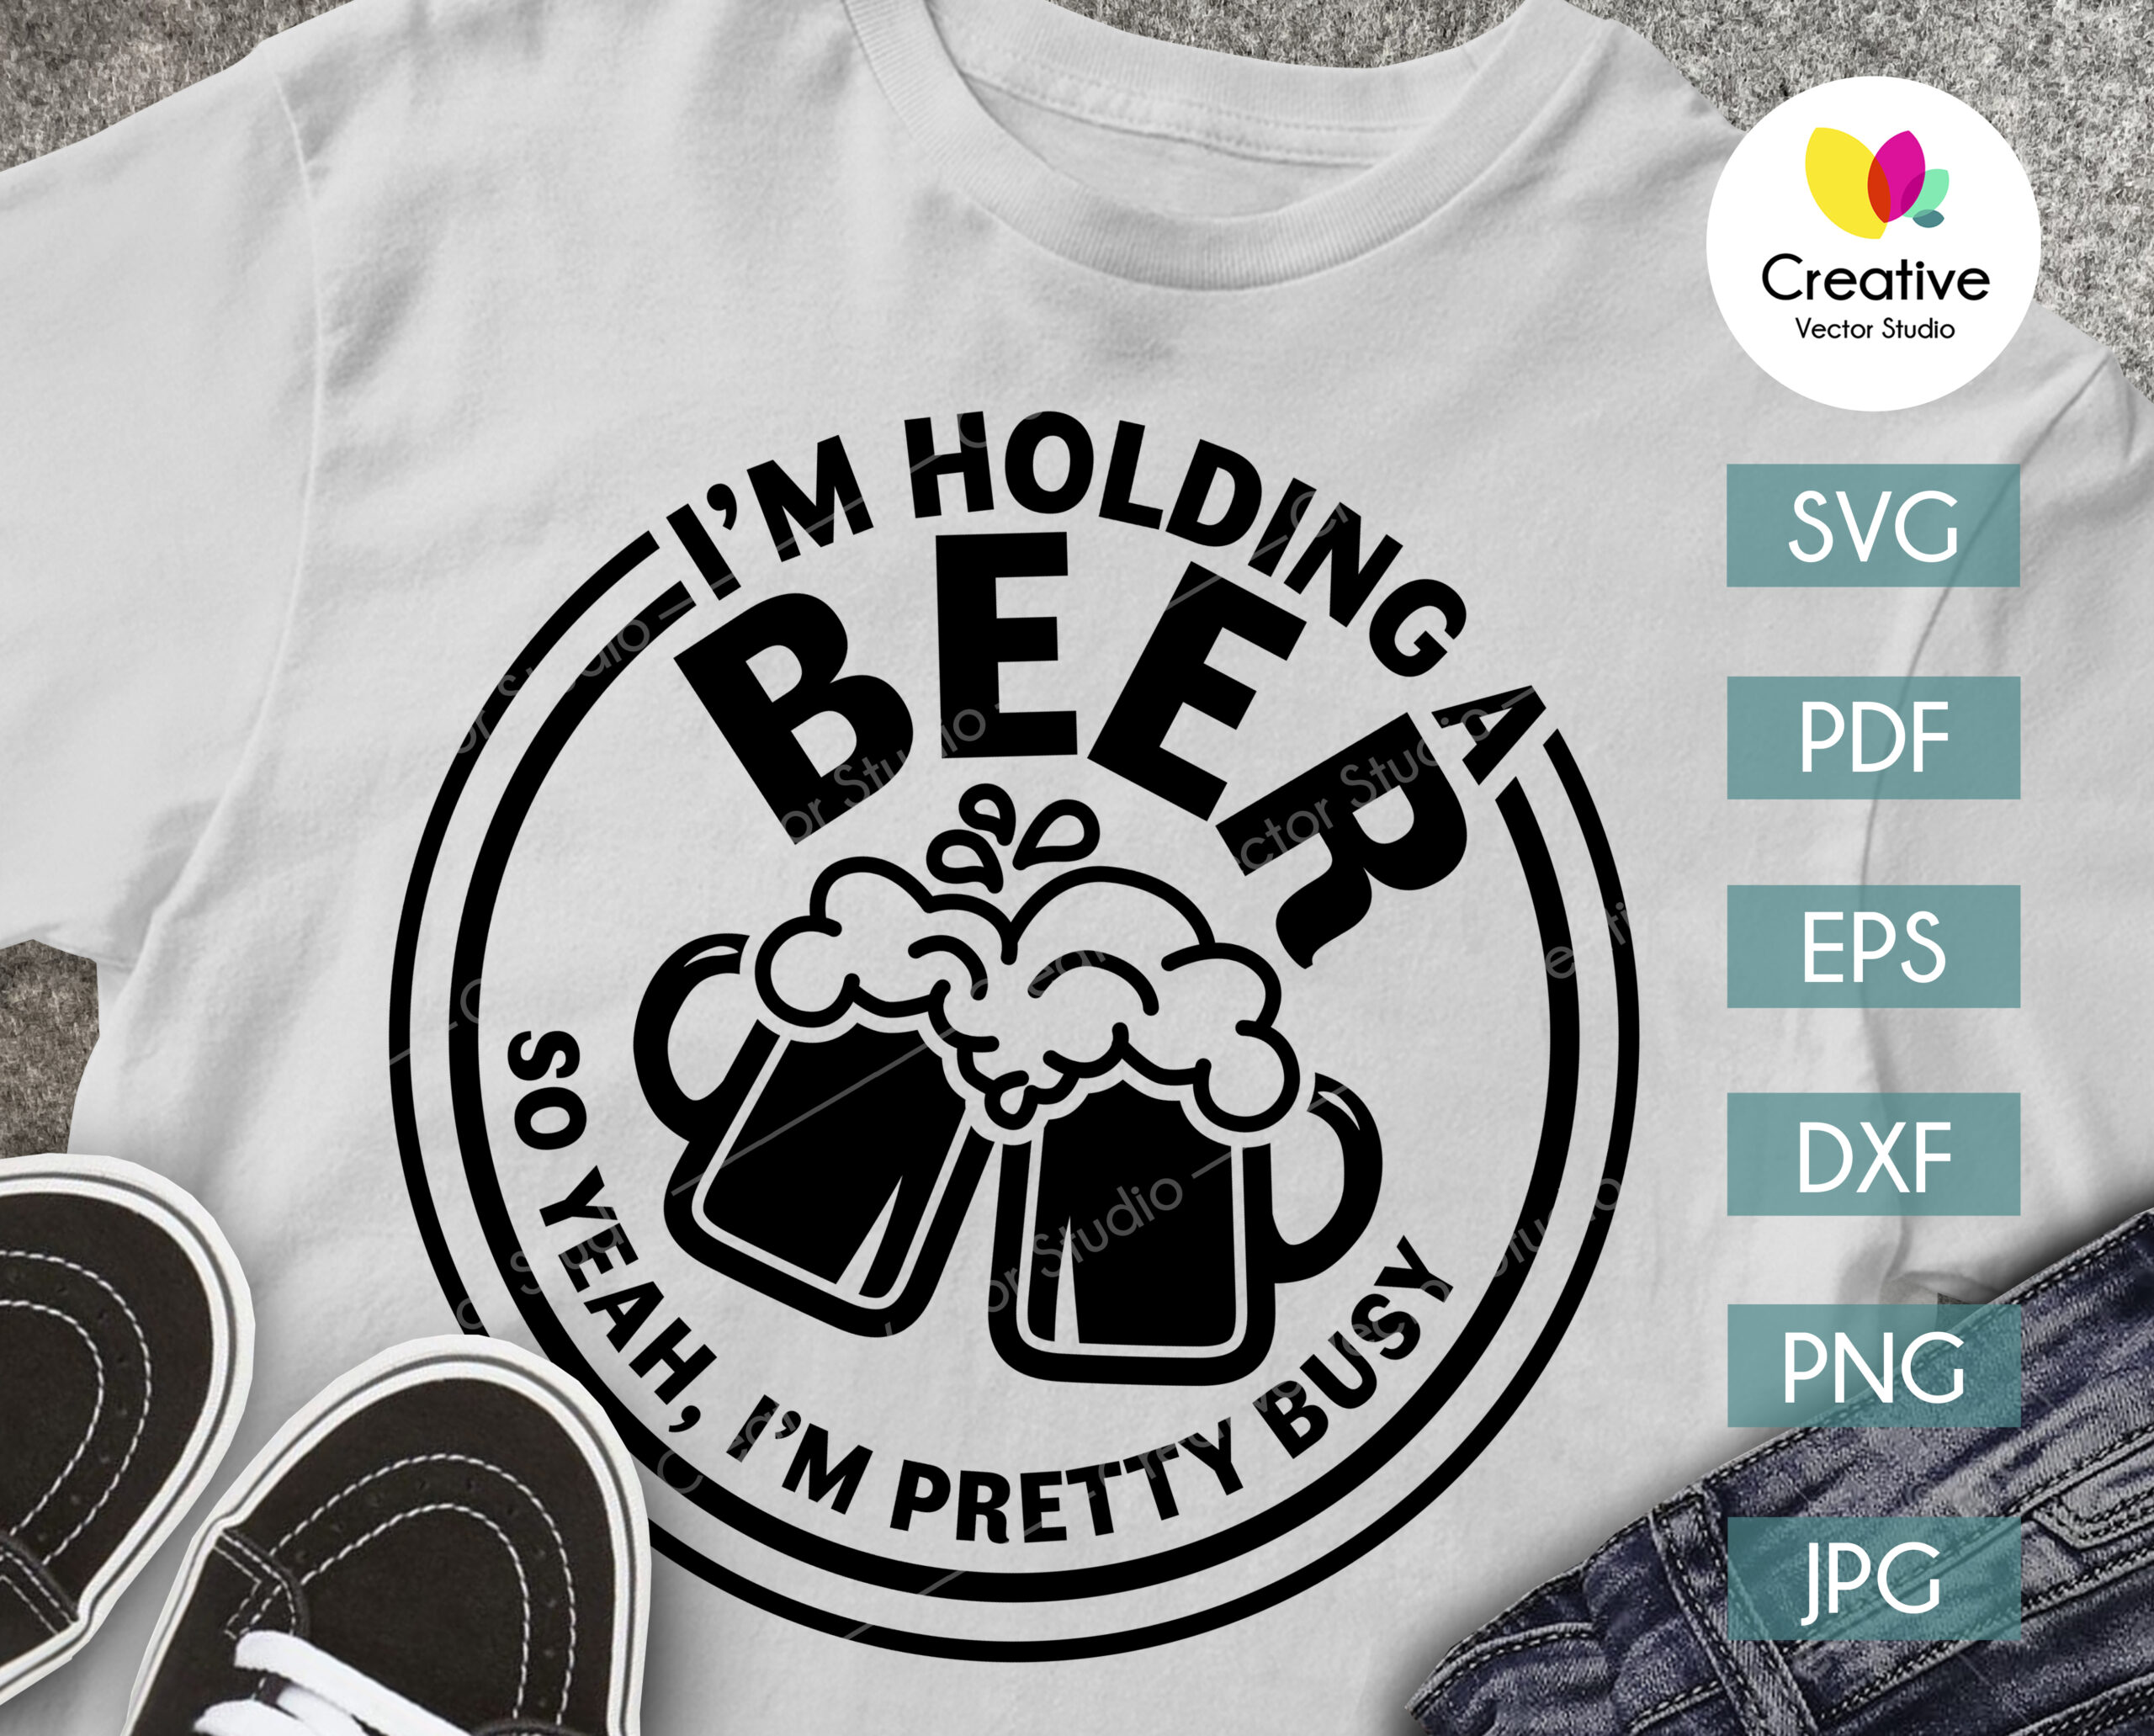 I'm Holding A Beer so Yeah I'm Pretty Busy T-shirt 